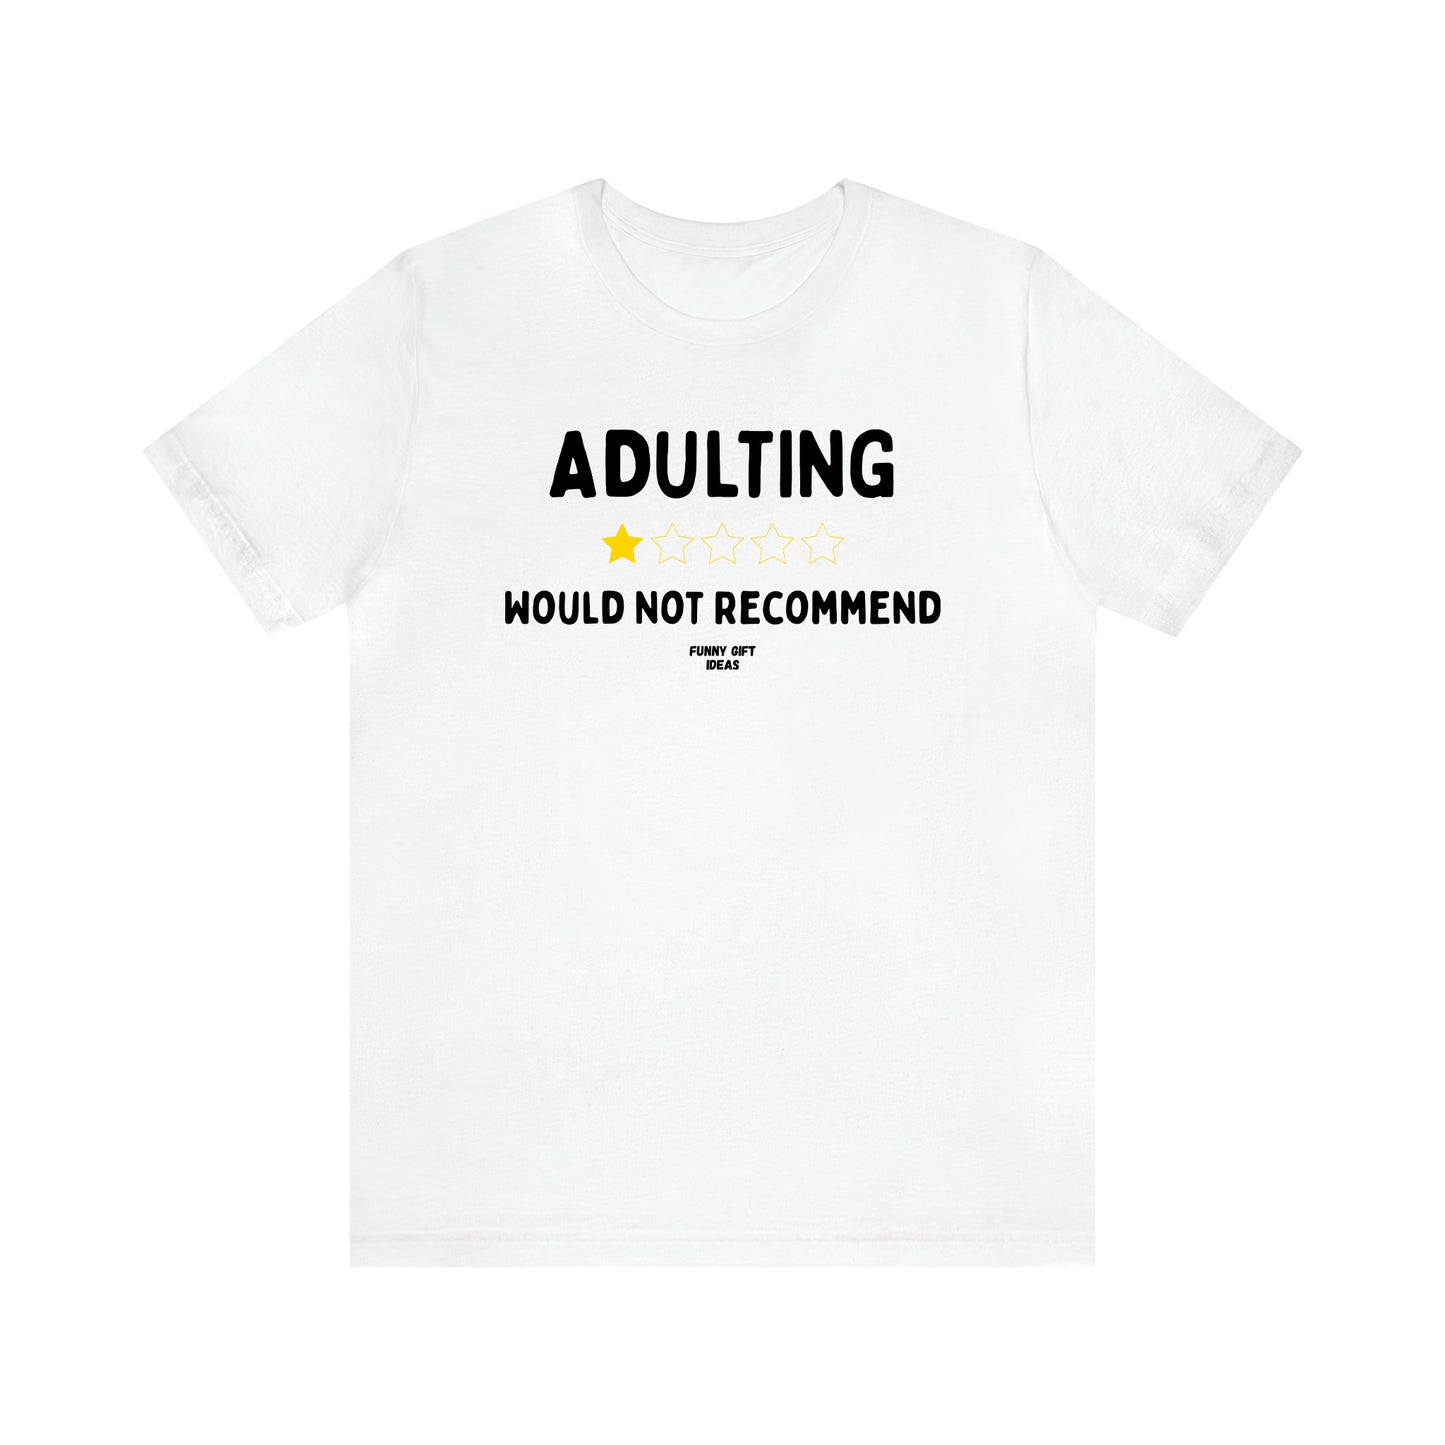 Women's T Shirts Adulting | Would Not Recommend - Funny Gift Ideas